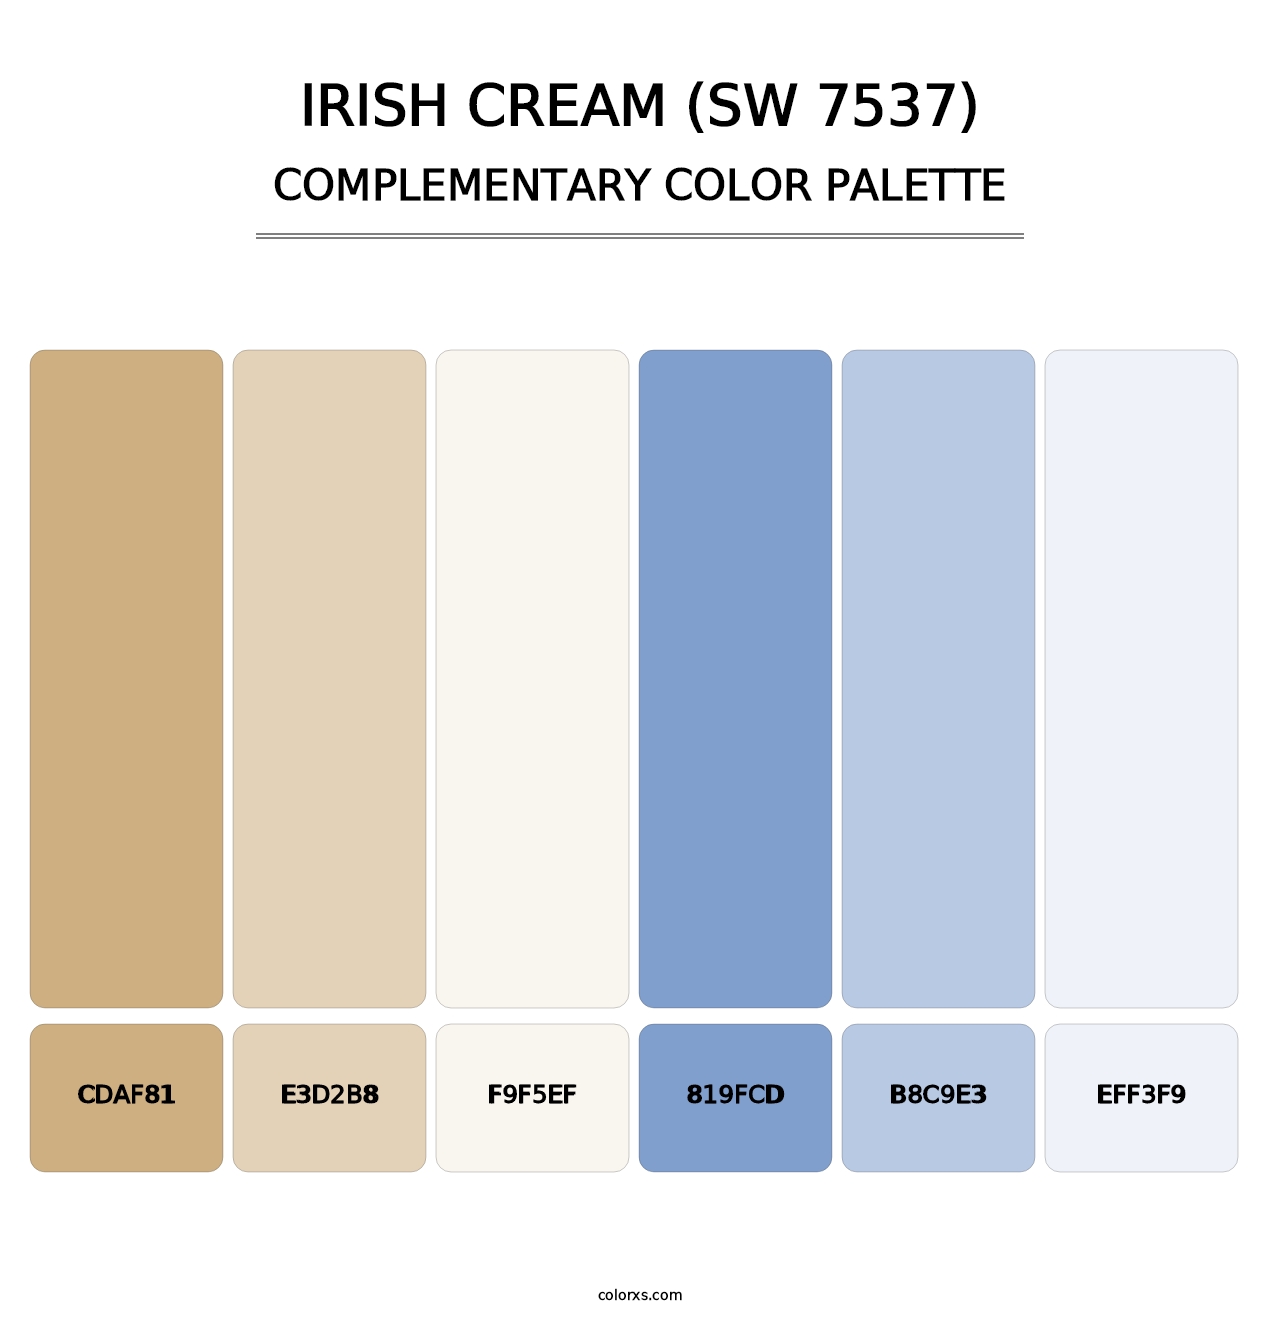 Irish Cream (SW 7537) - Complementary Color Palette